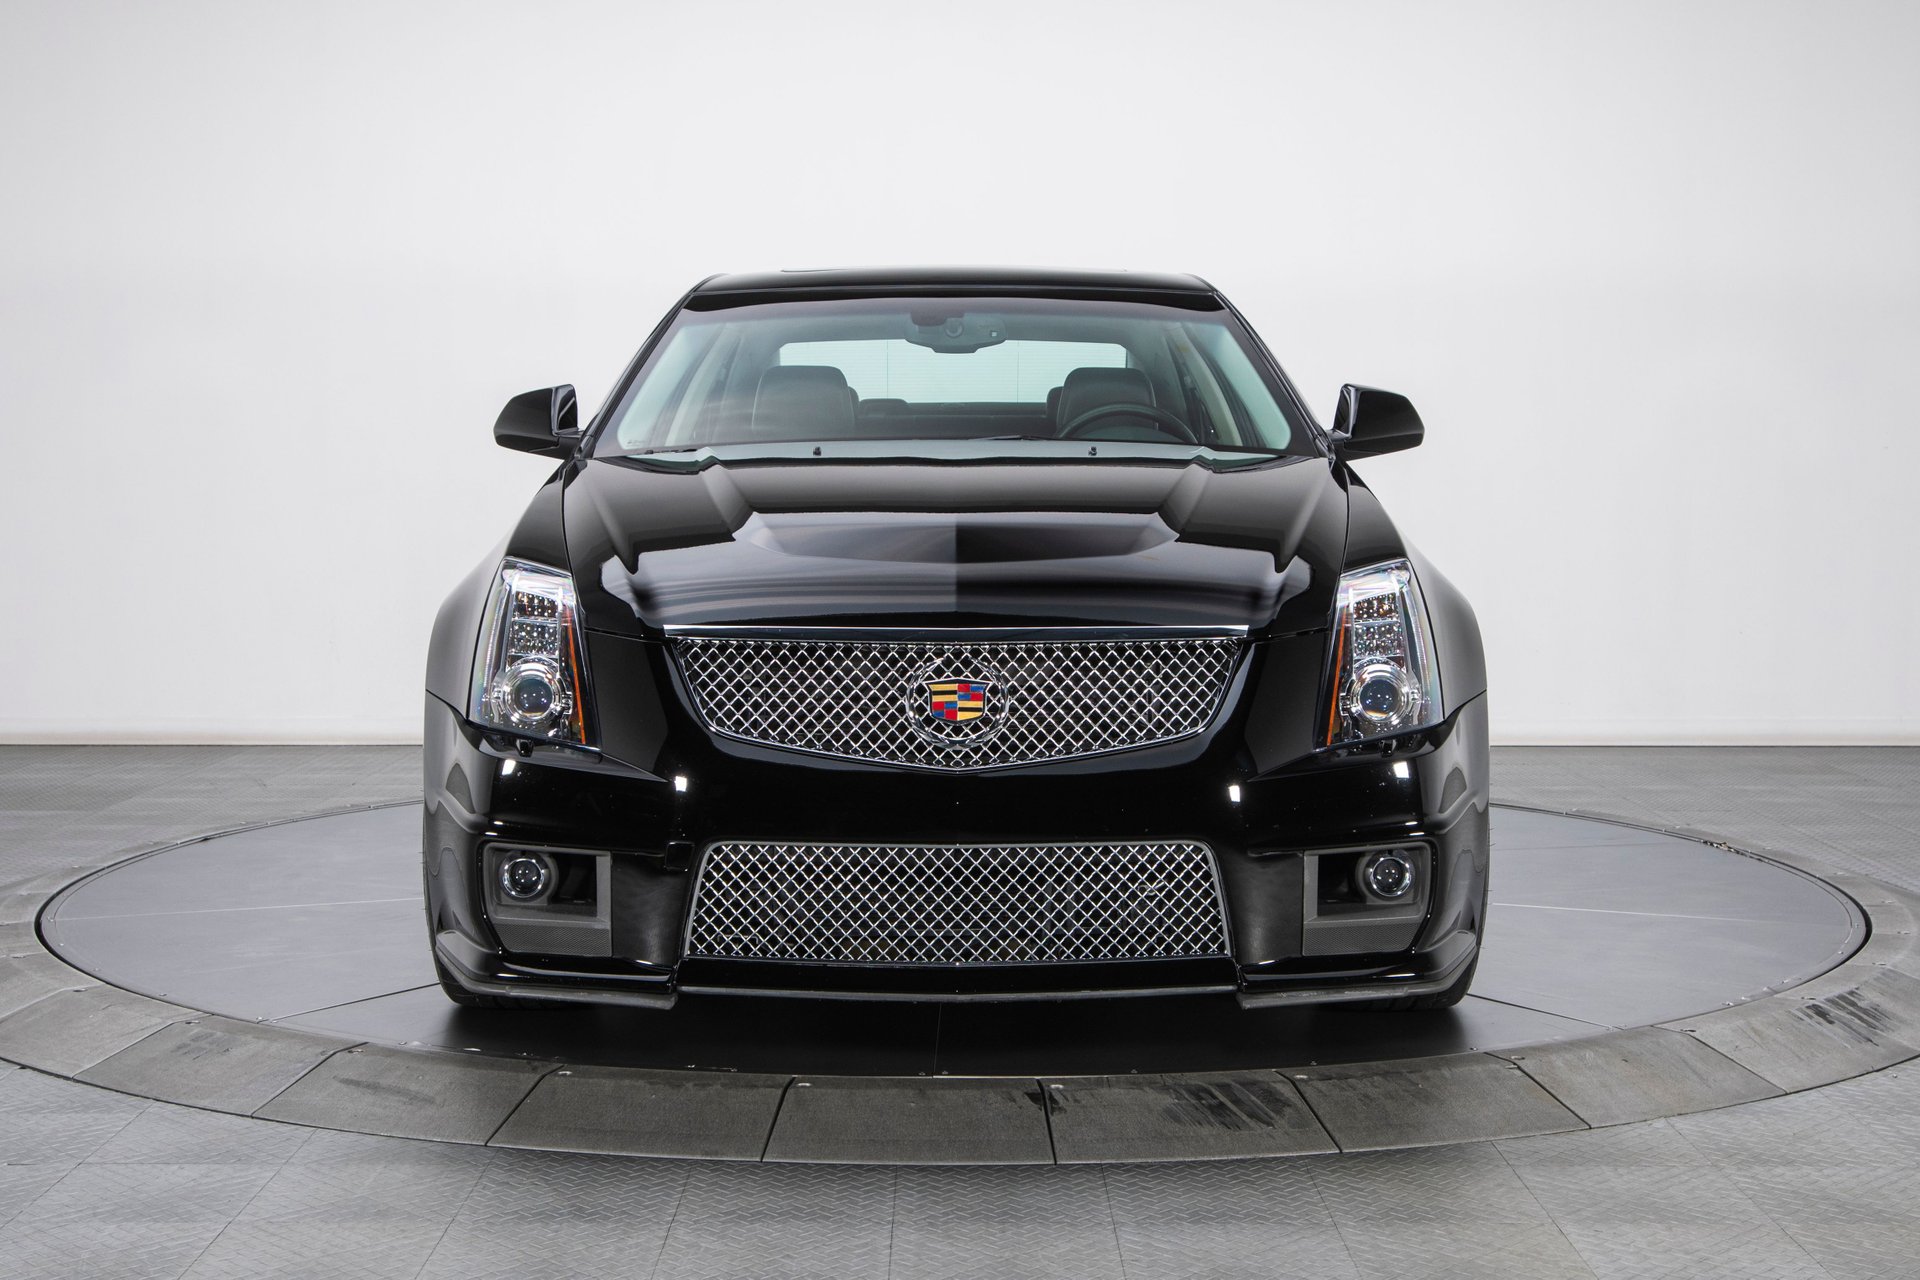 For Sale 2013 Cadillac CTSV